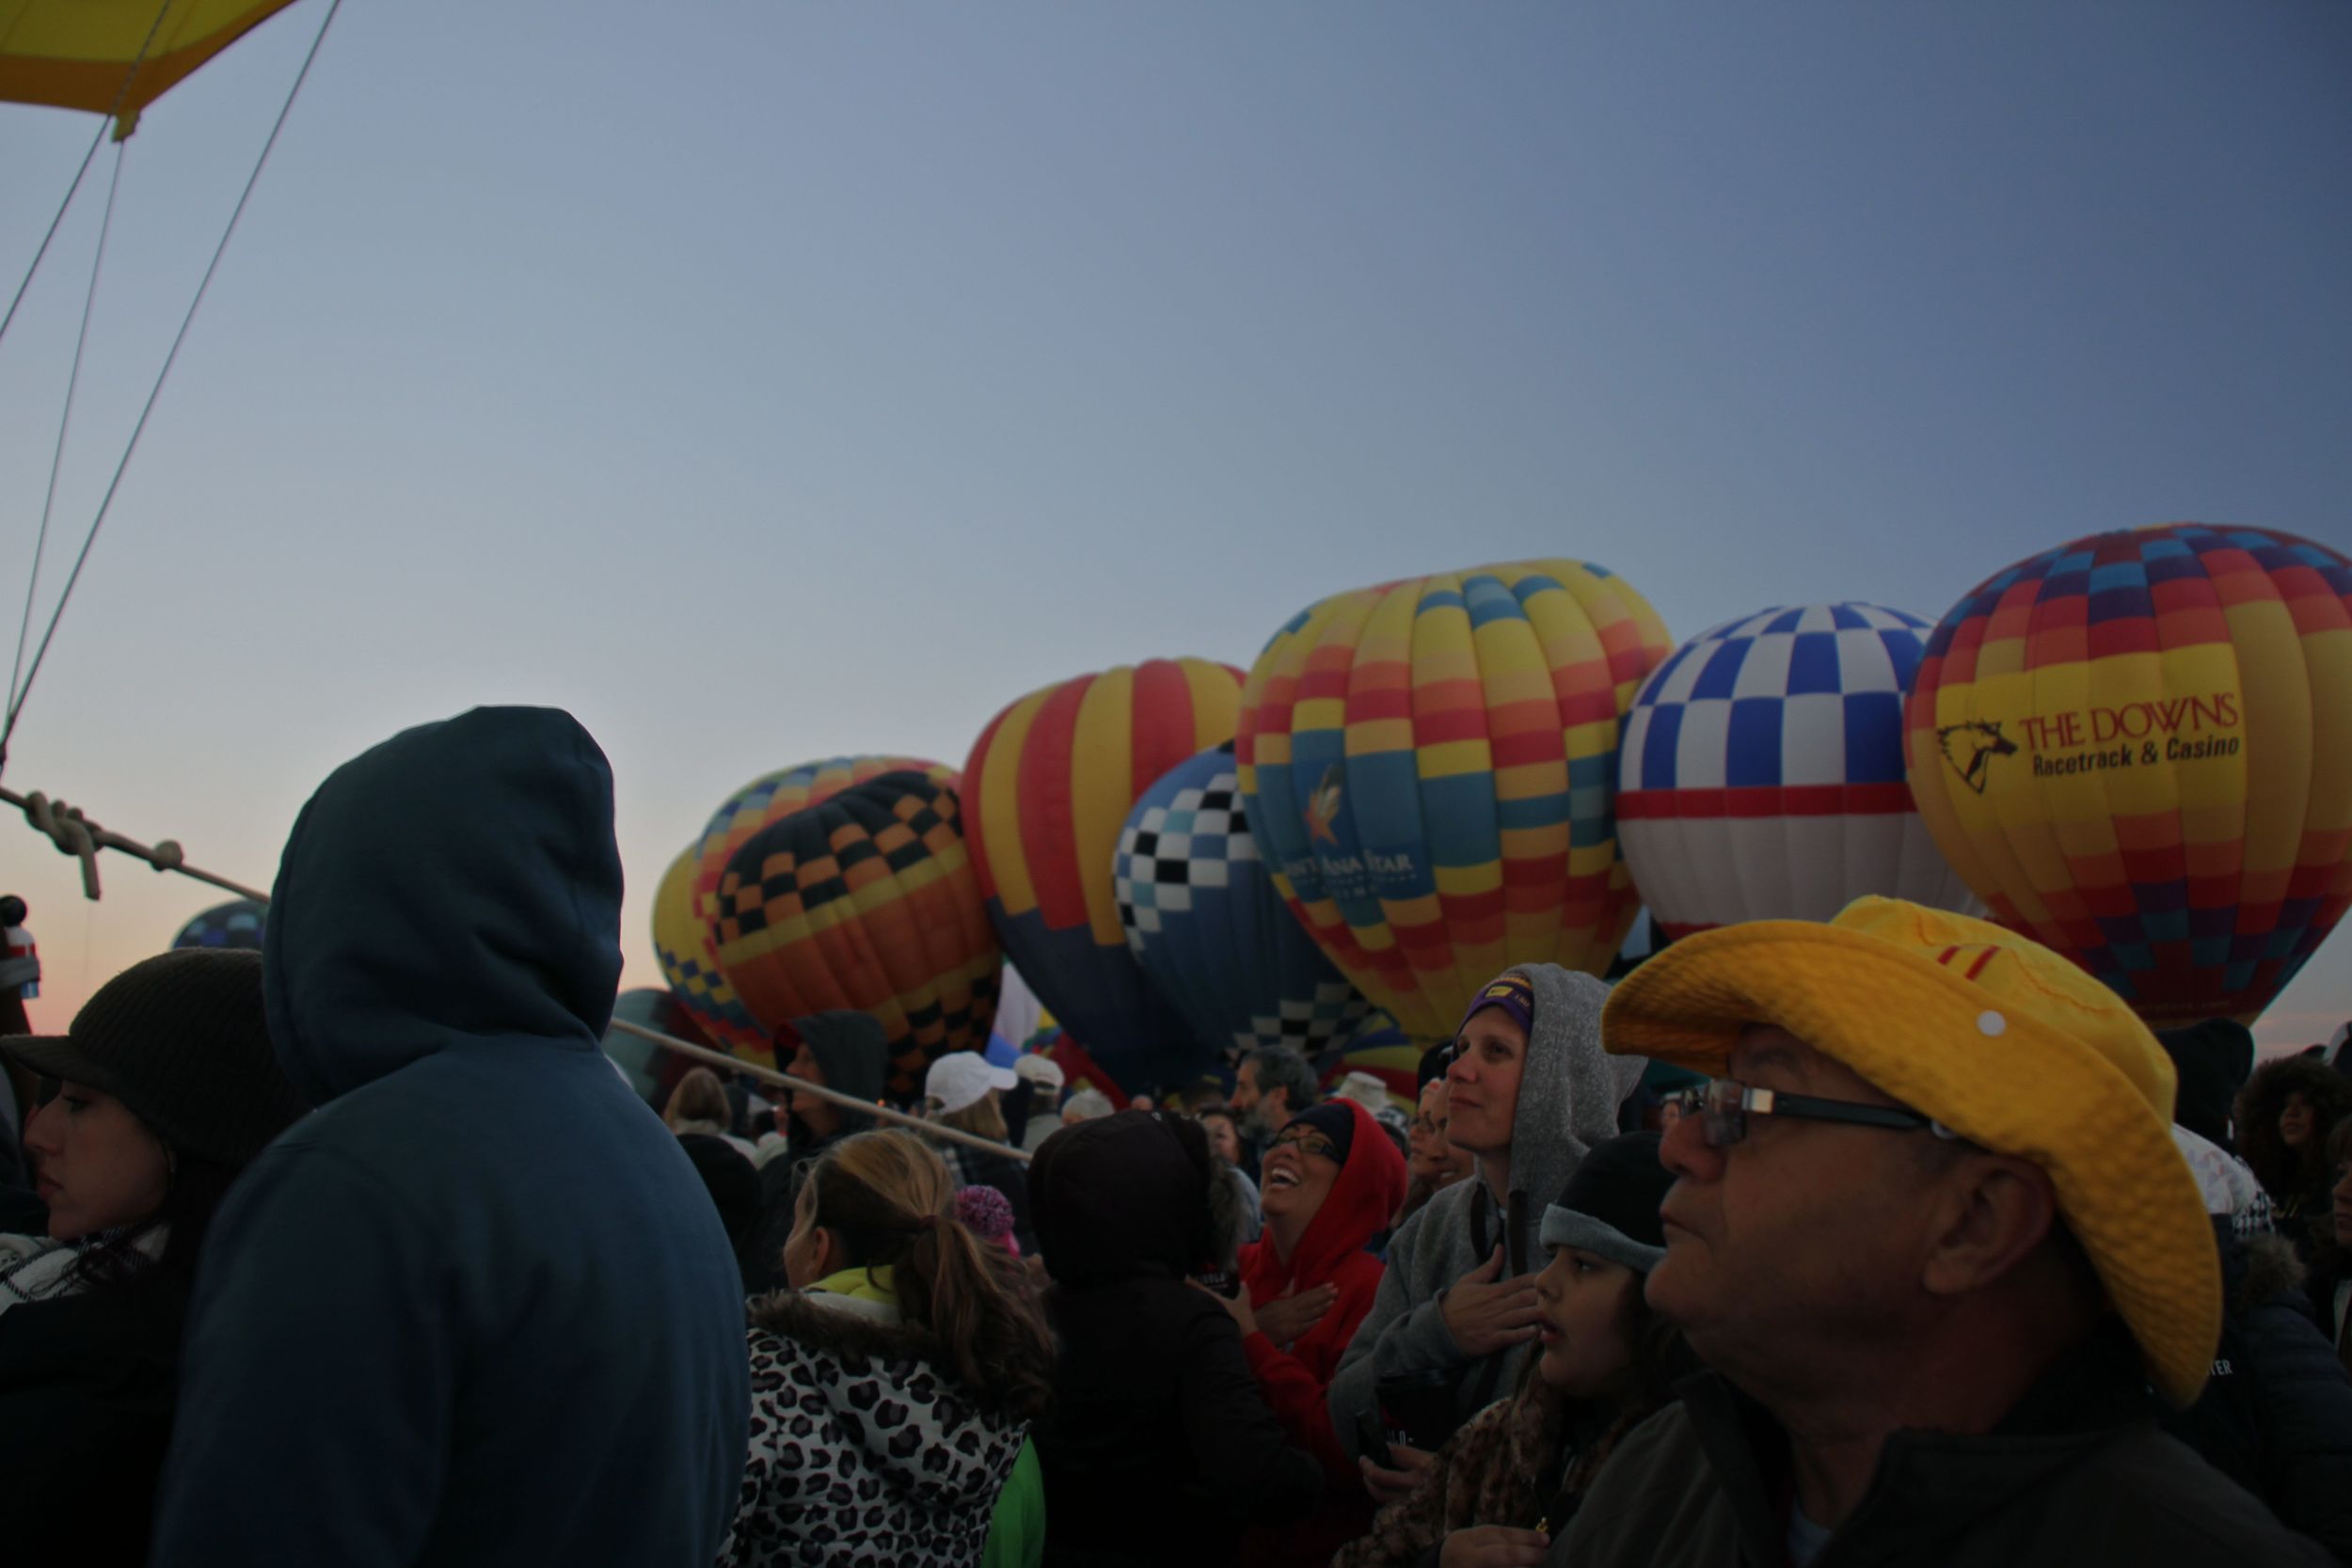 A wall of balloons rises around the crowd